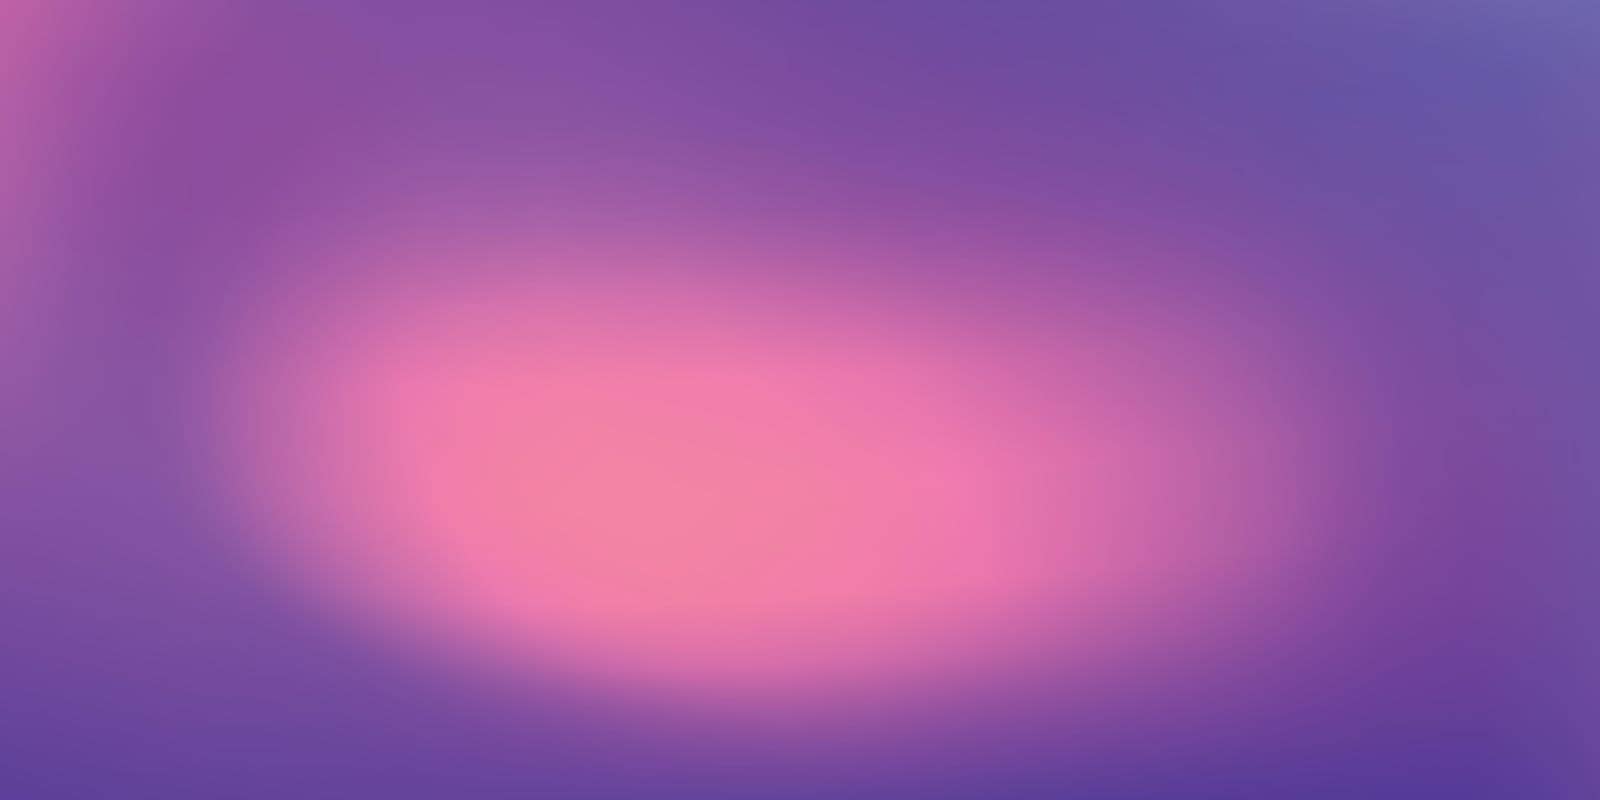 illustration of abstract blurred template background purple color meshed to pink